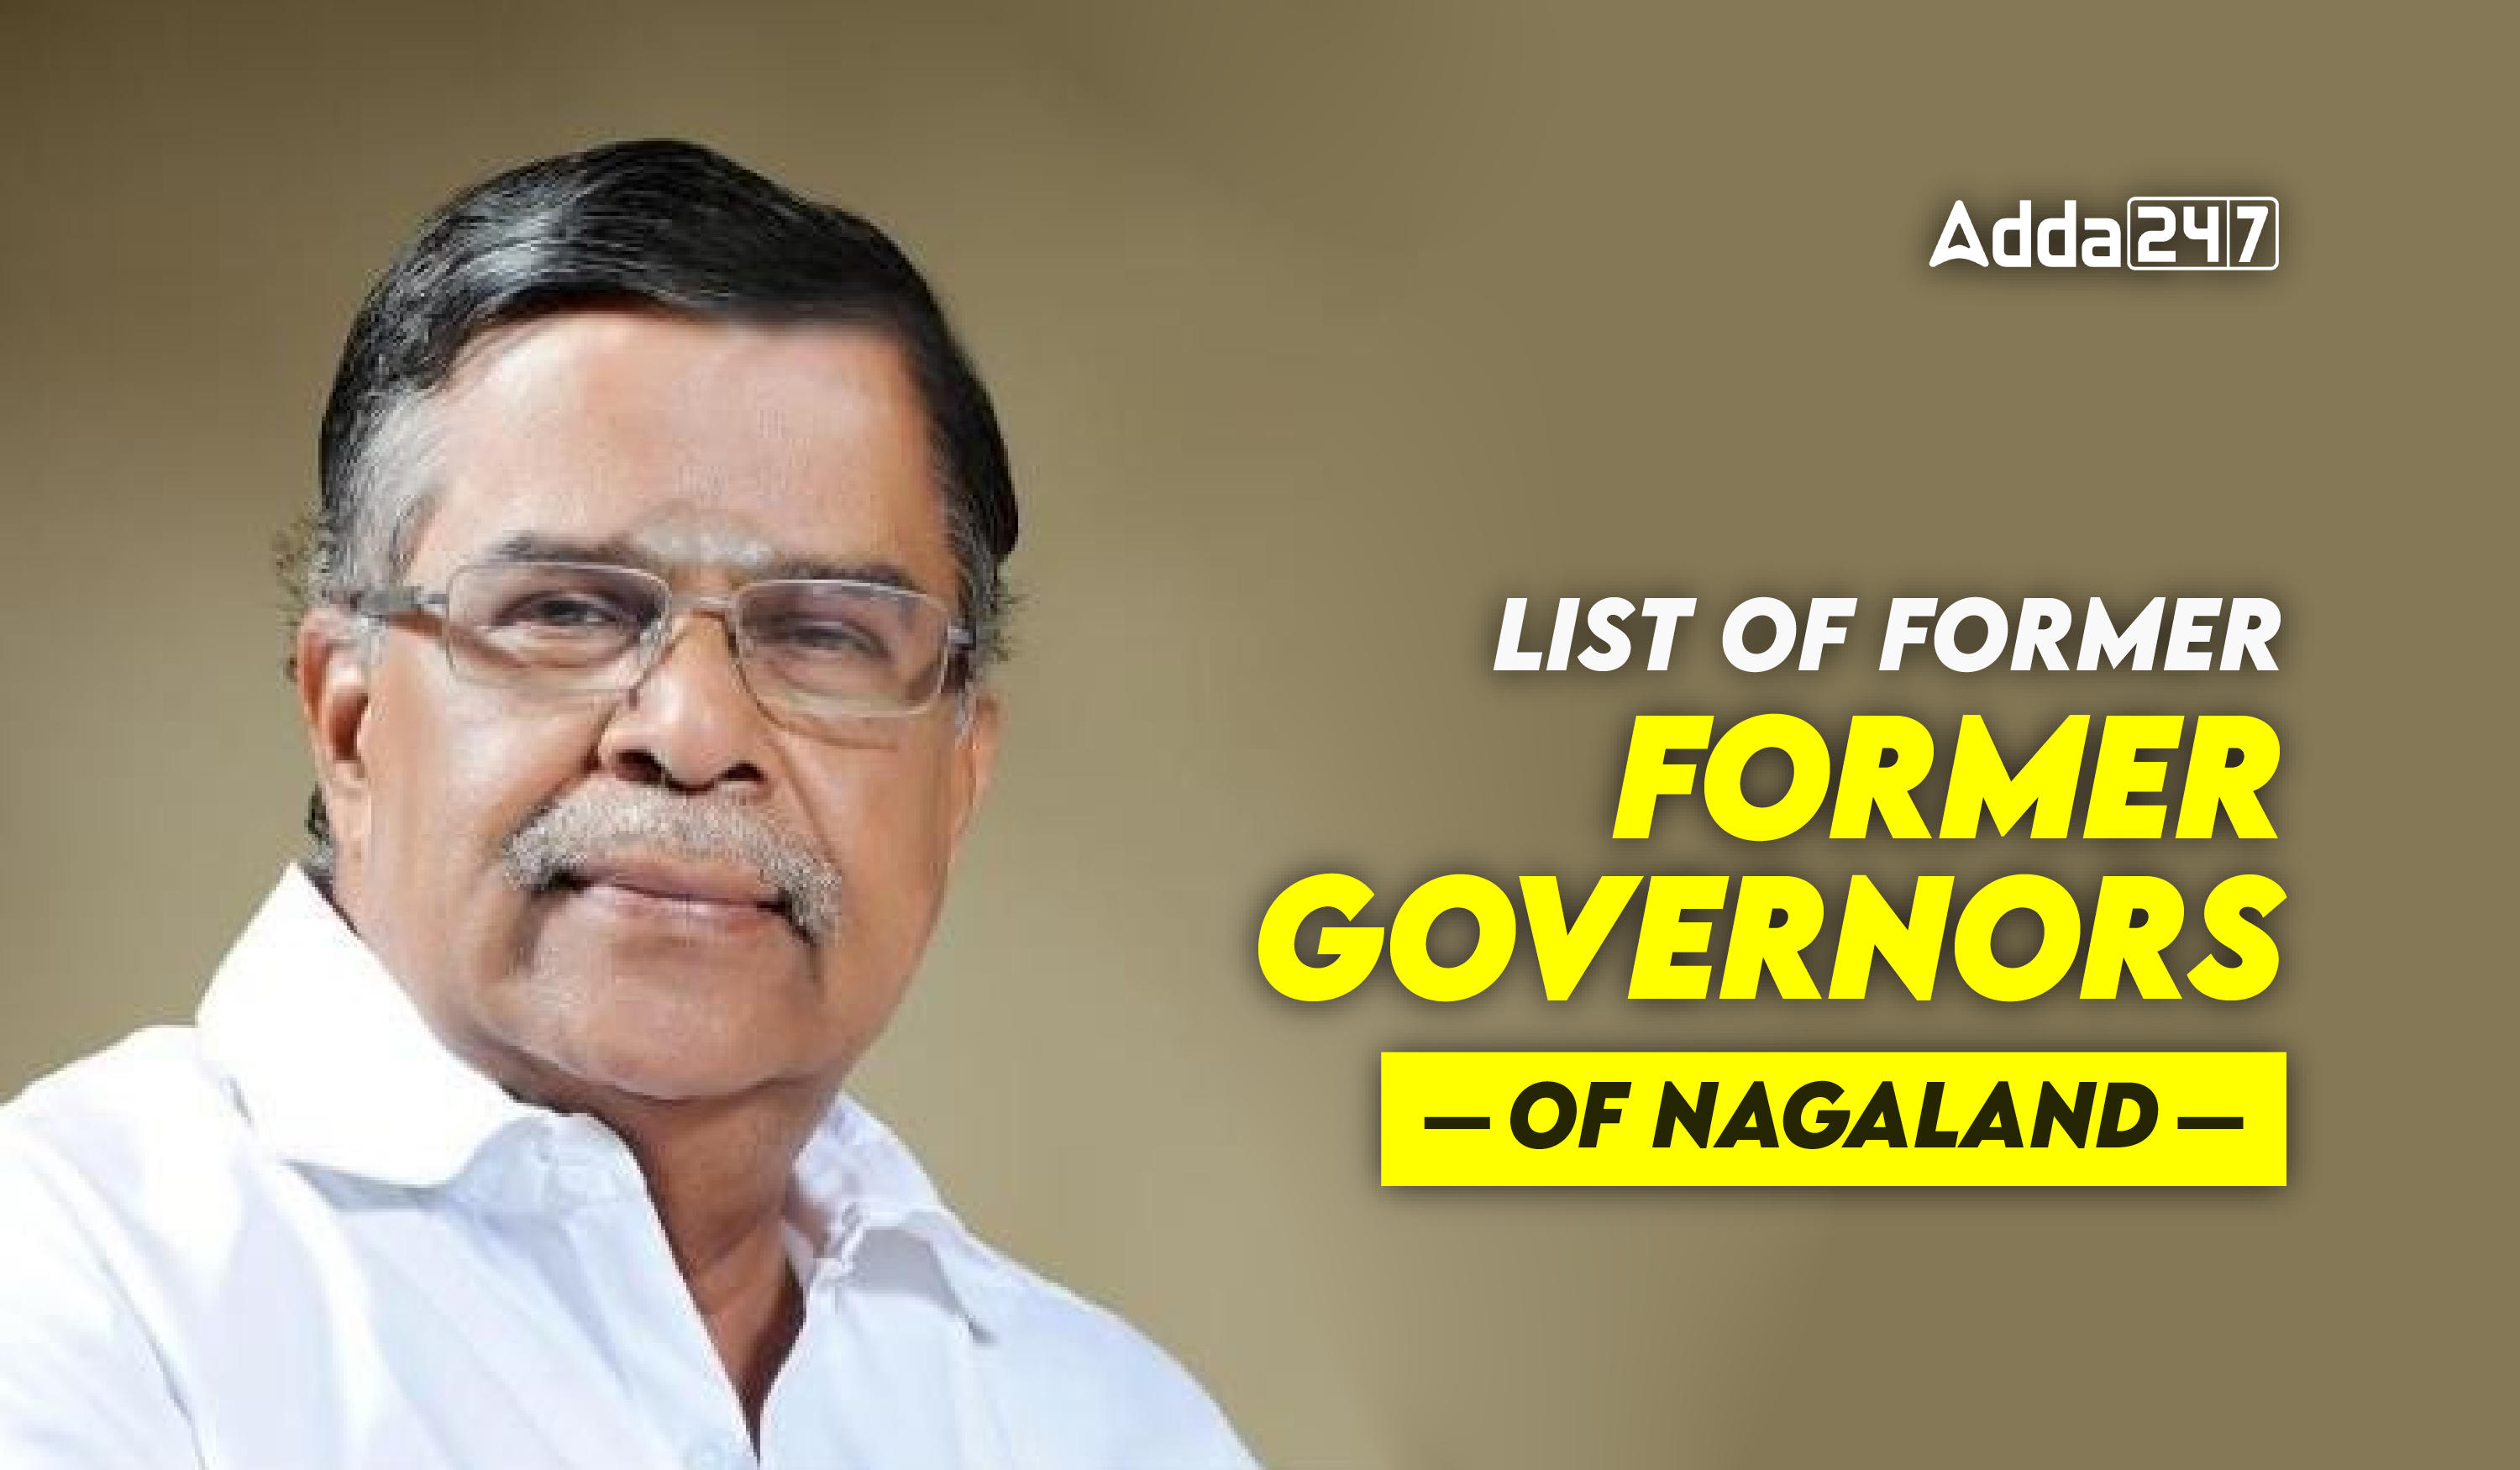 List of Former Governors of Nagaland